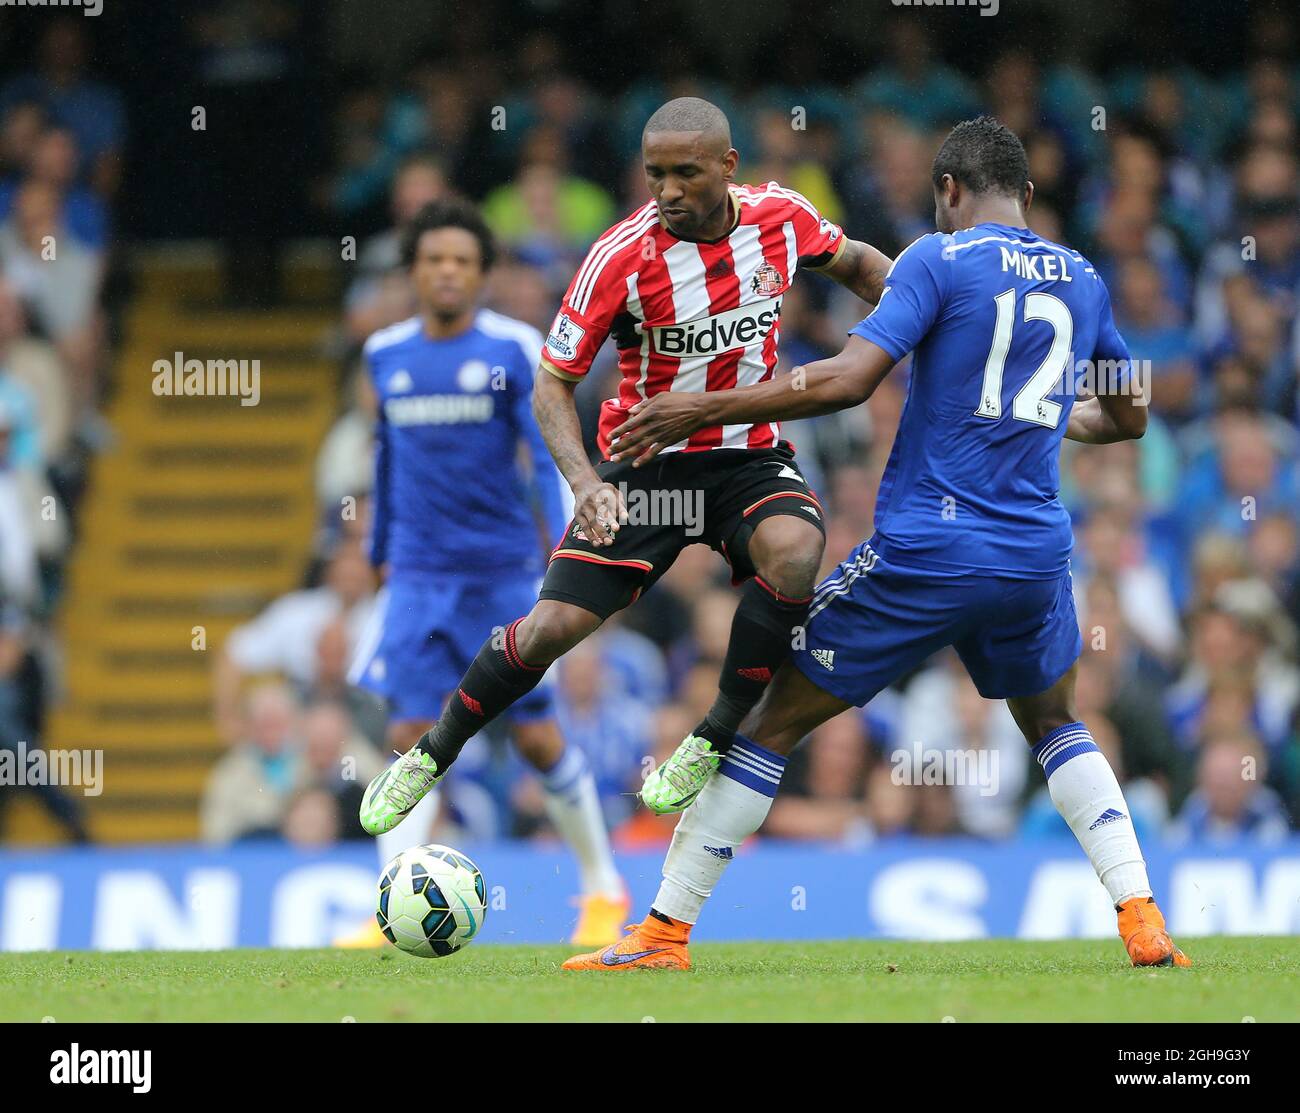 Chelsea's John Mikel Obi tussles with Sunderland's Jermain Defoe during the Barclays Premier League match between Chelsea and Sunderland at the Stamford Bridge, London on May 24, 2015. Picture: David Klein. Stock Photo